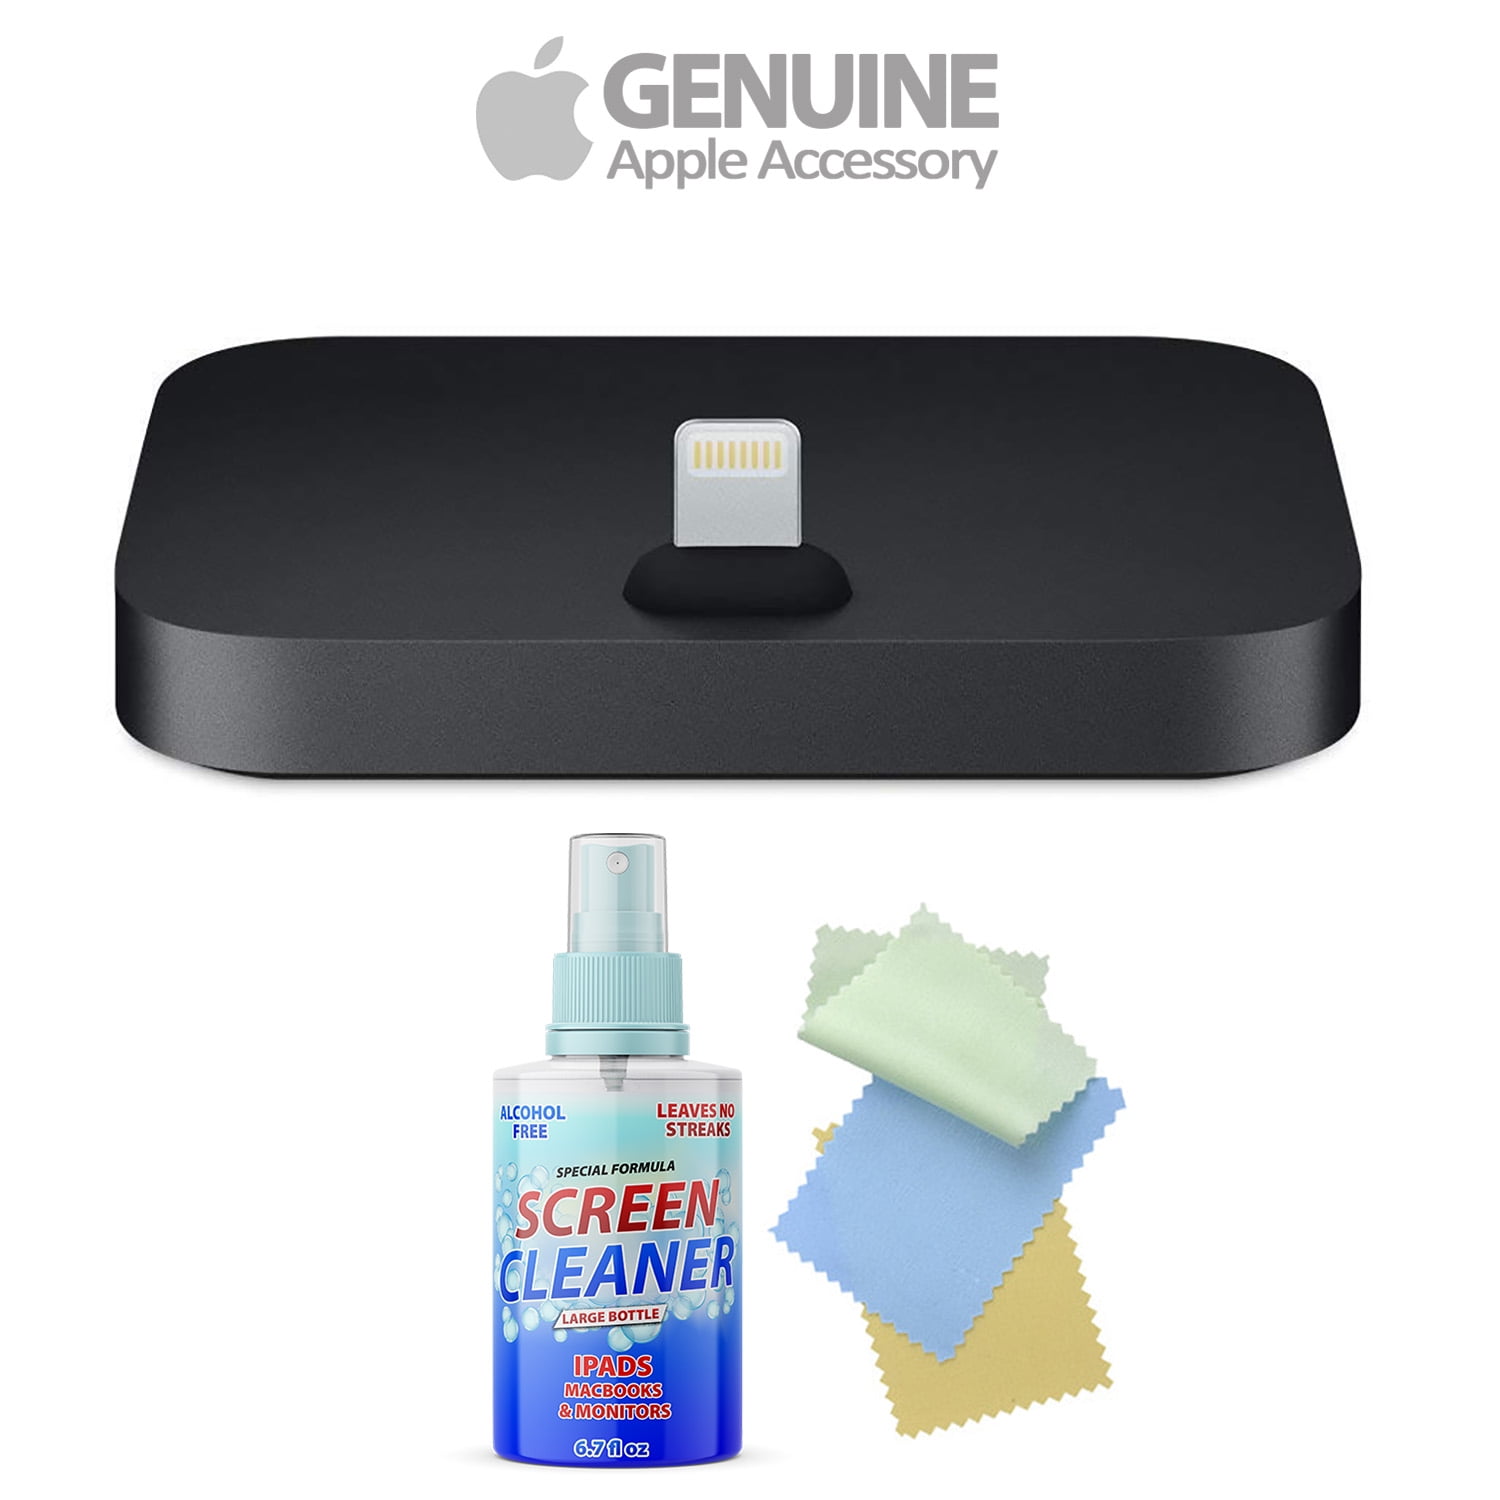 ifree iphone cleaner